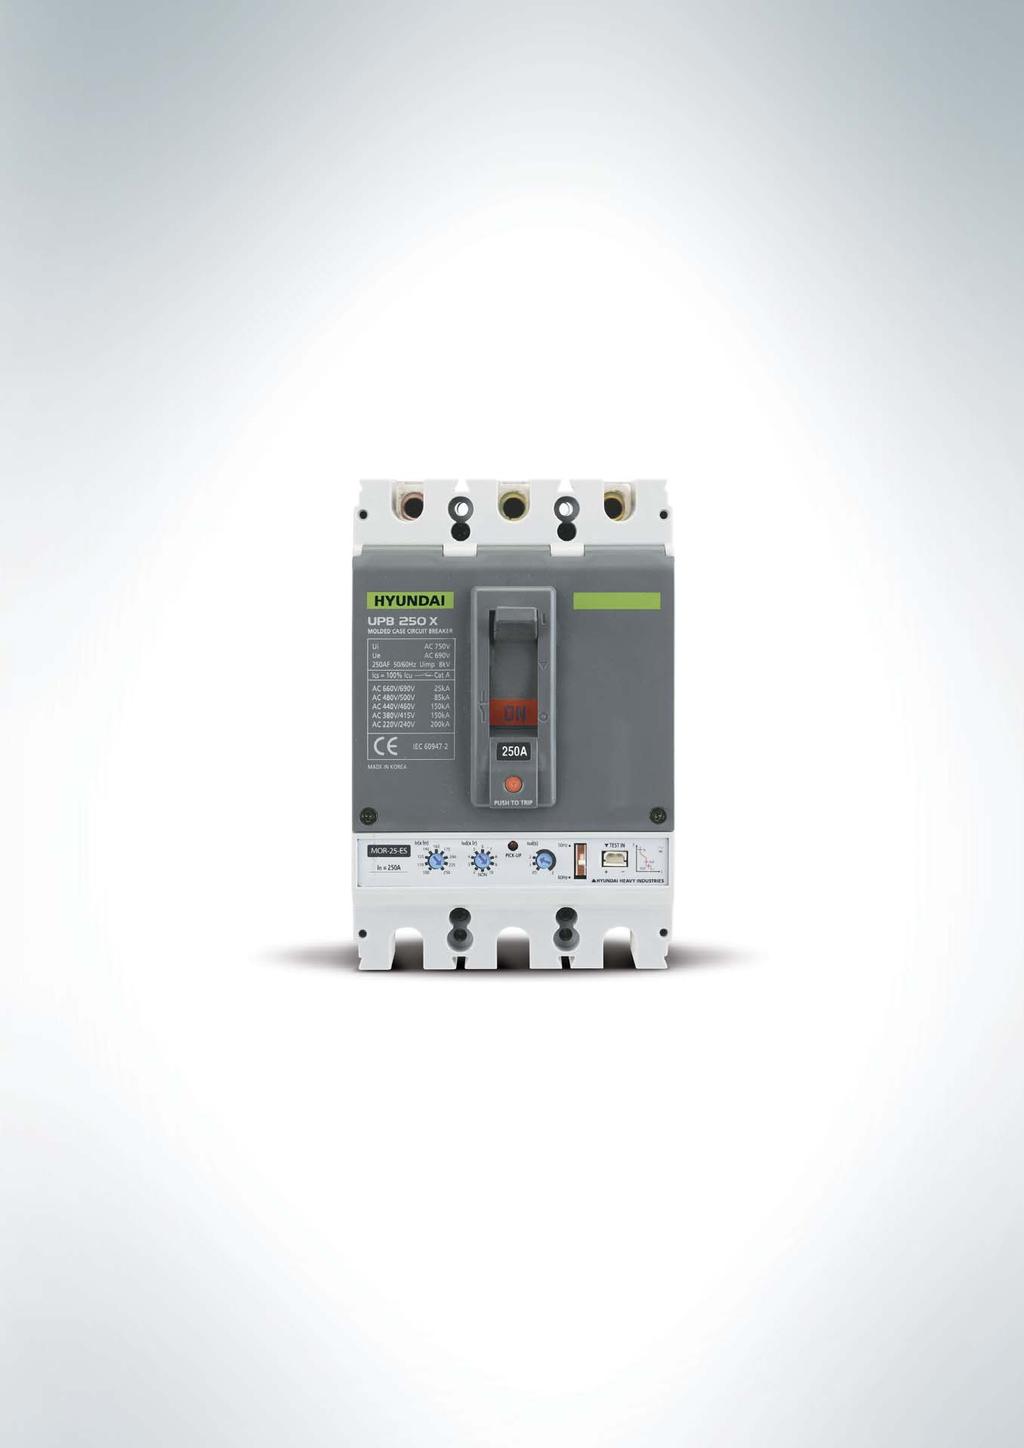 U-Series Features / Molded Case Circuit Breaker Modern and refined design Line side terminal Model name UPB : Type 250 : Ampere frame size X : Recognition code for order Hyundai brand logo Rated